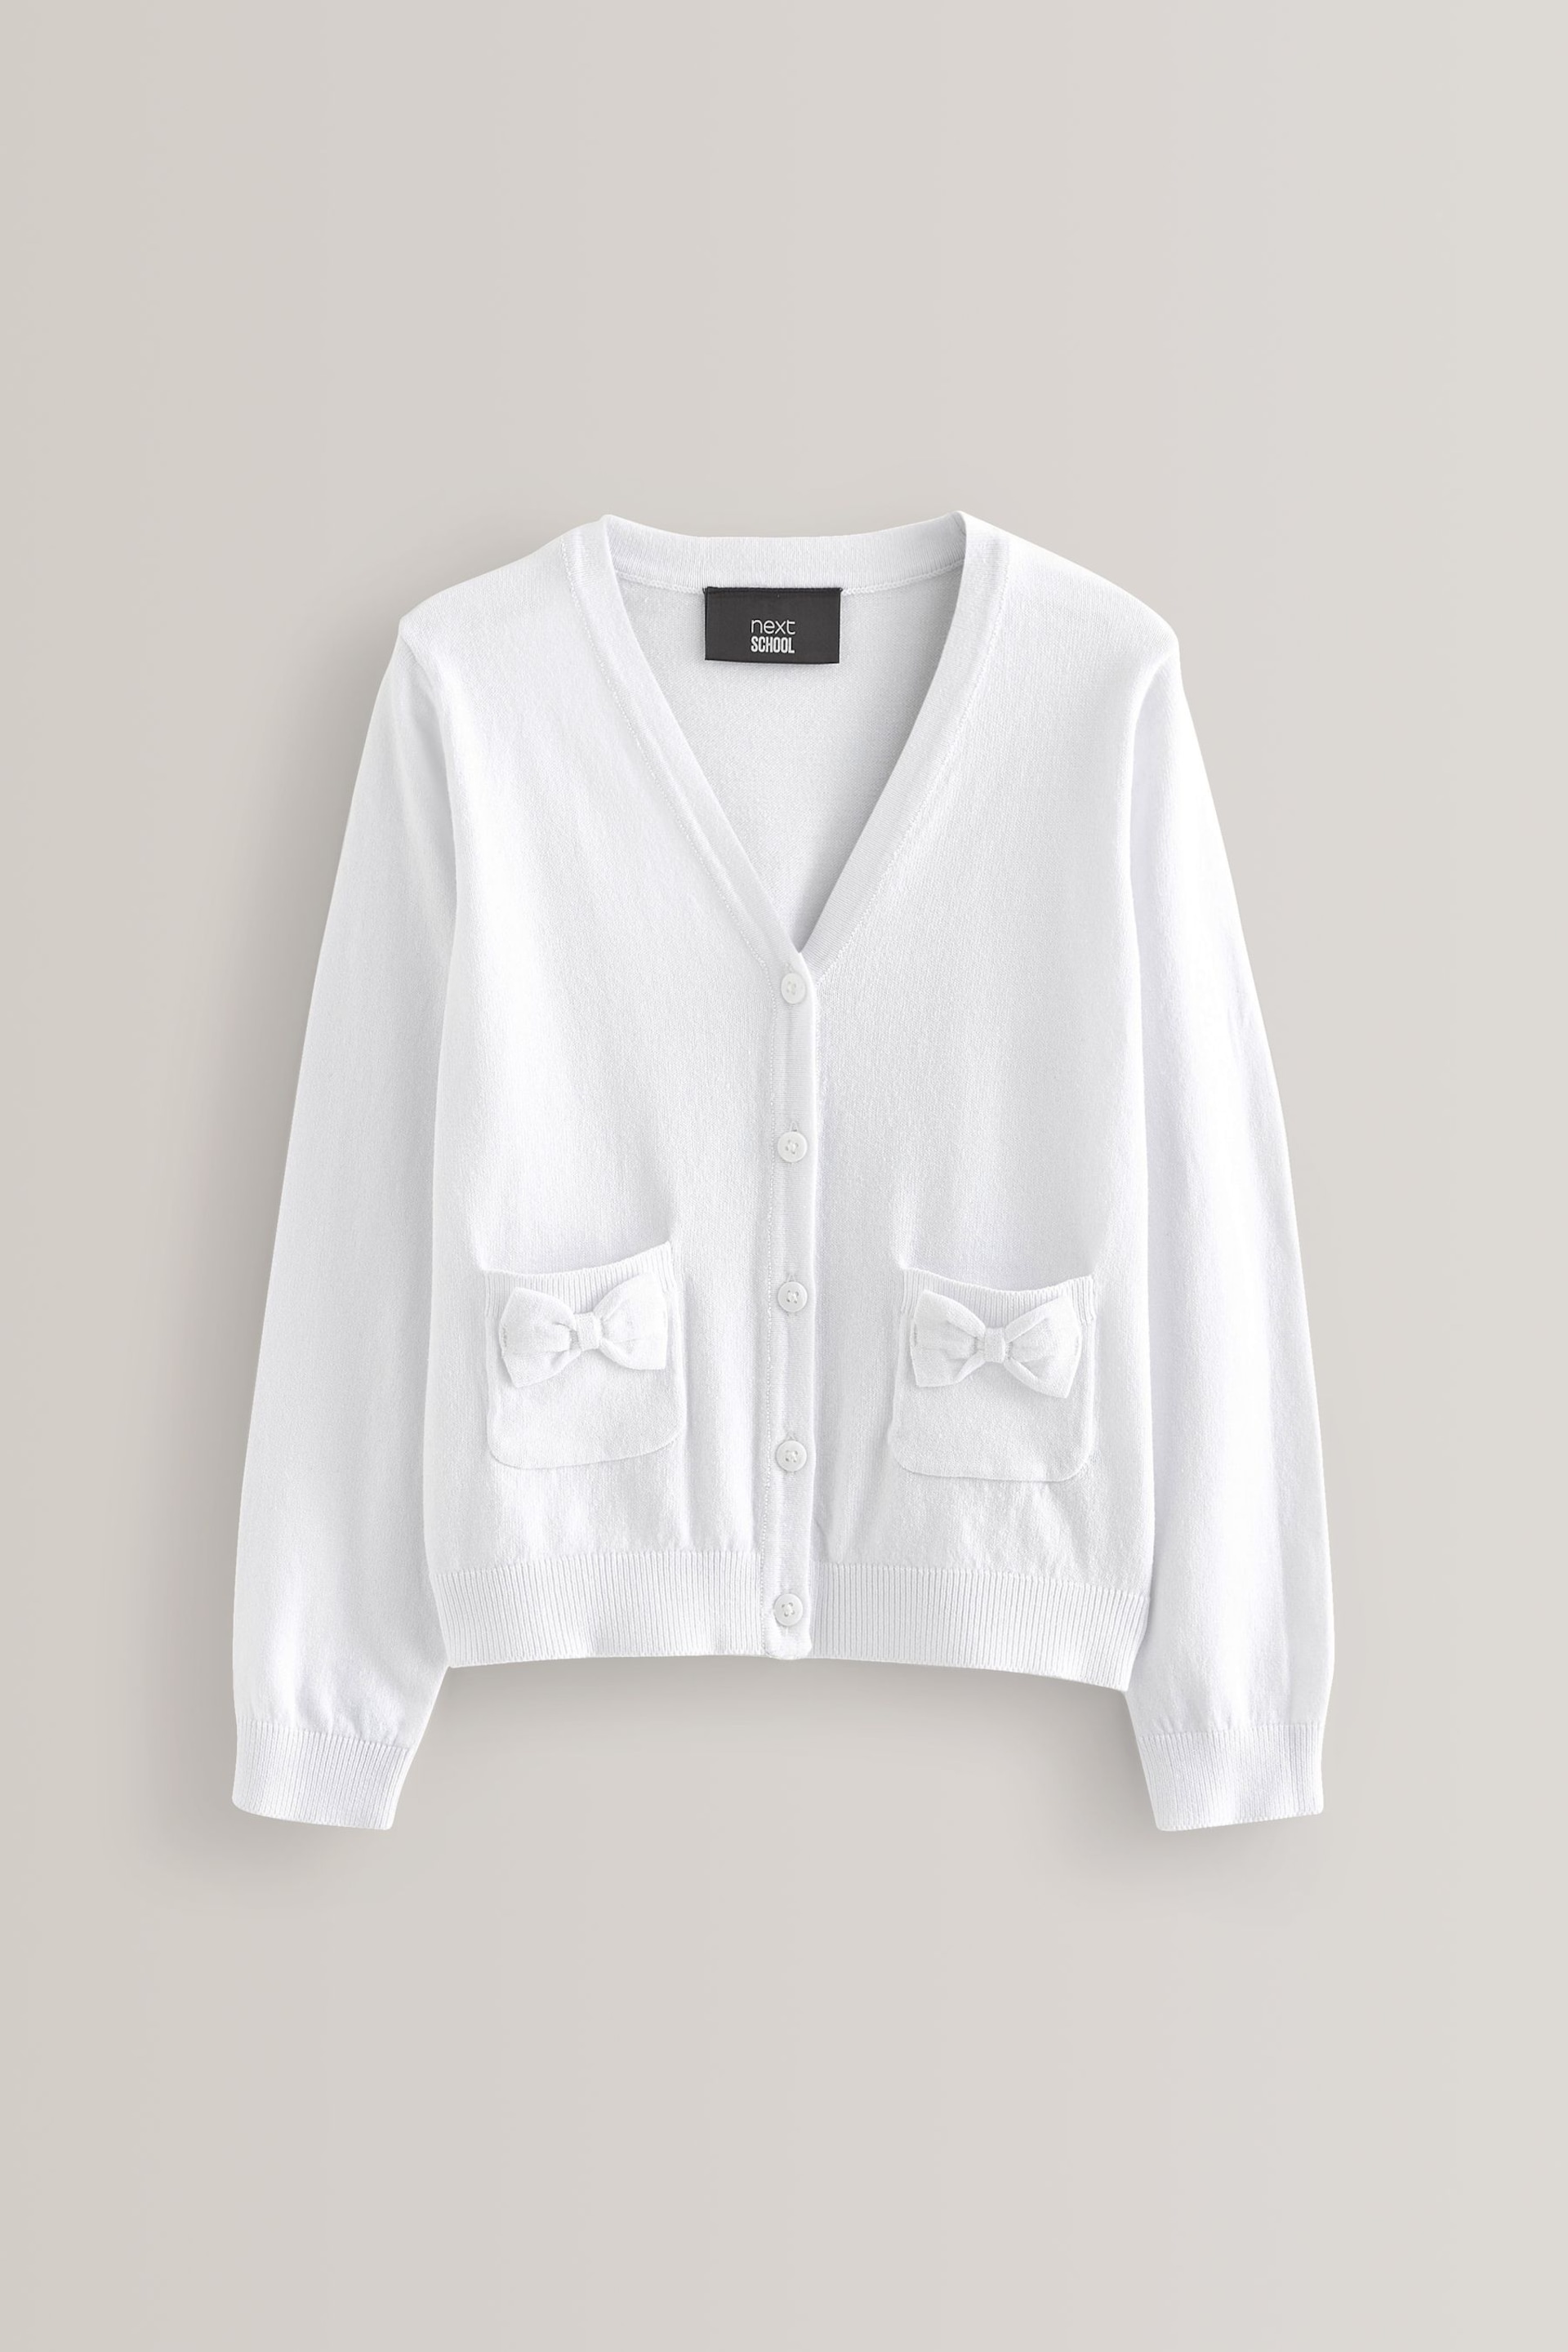 White Cotton Rich Bow Pocket School Cardigan (3-16yrs) - Image 1 of 5